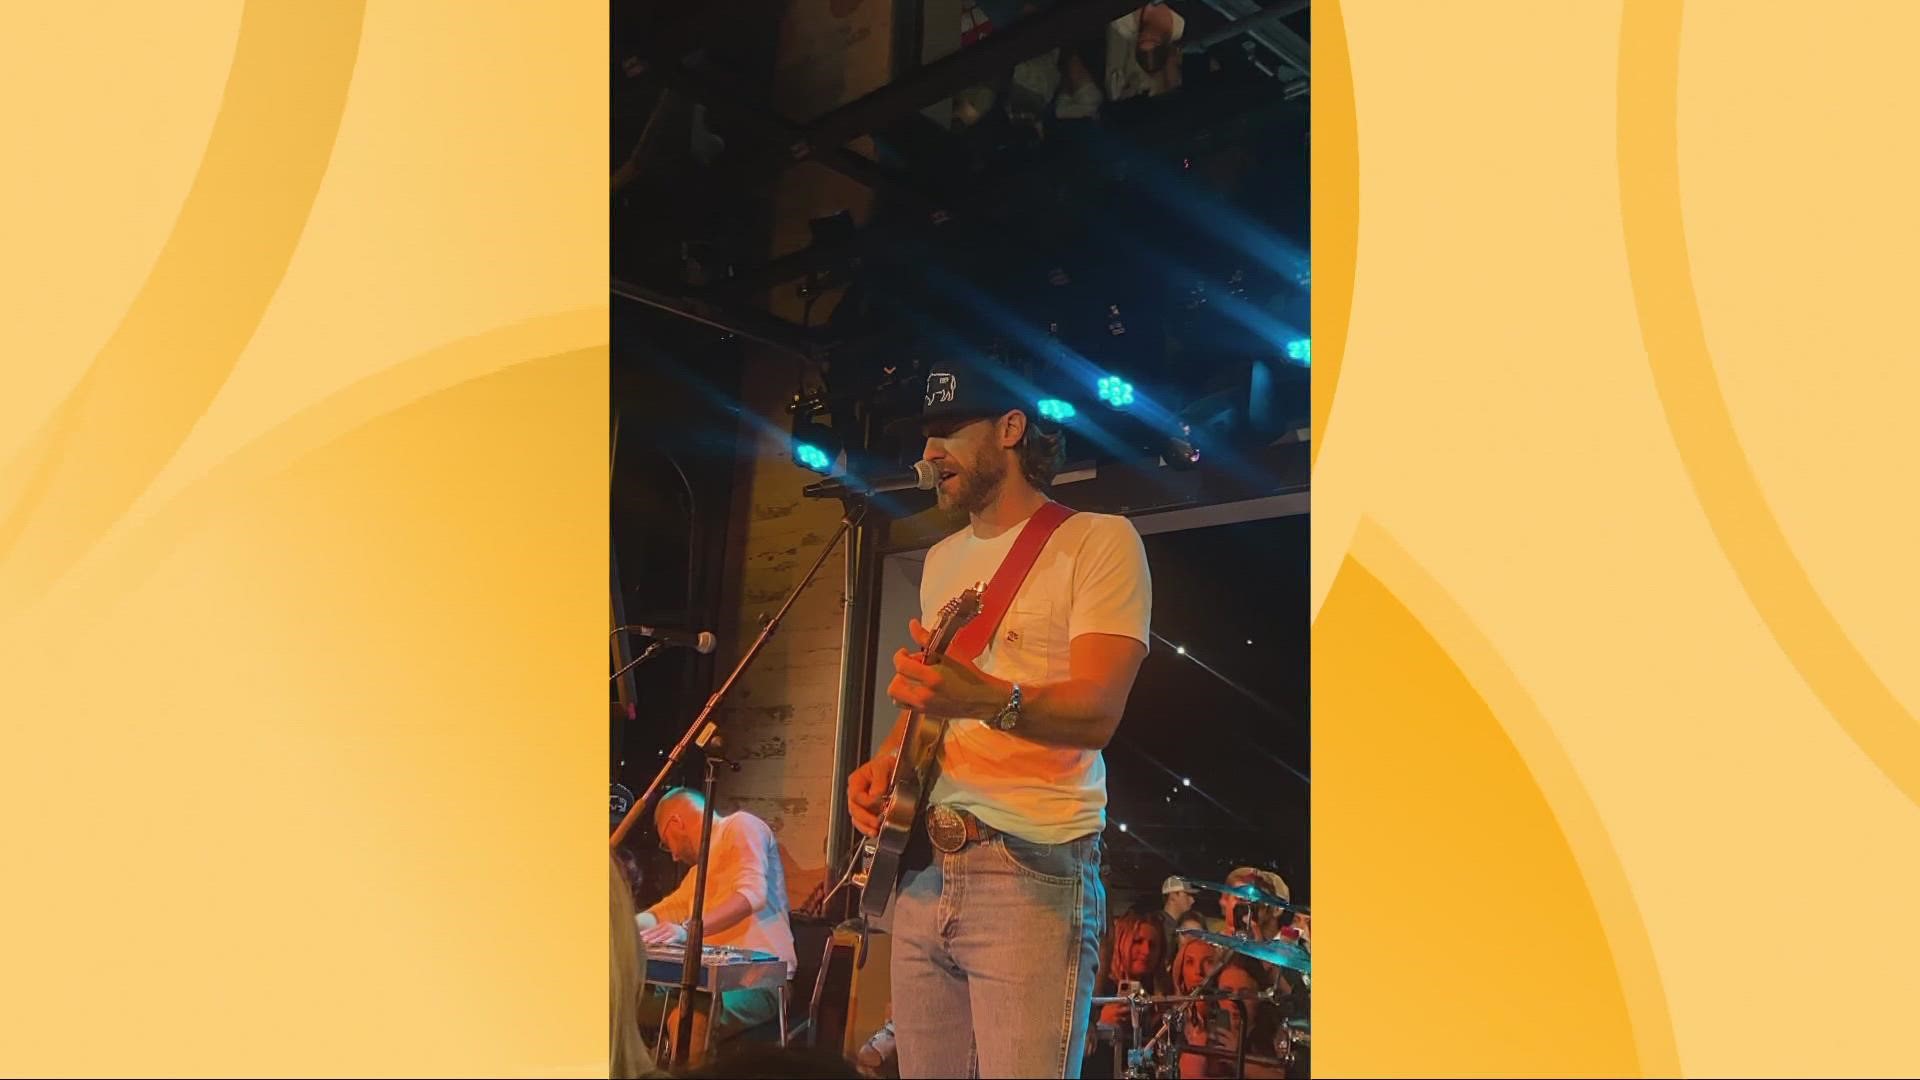 Chase Rice surprised fans at Welcome to the Farm in Cleveland's Flats.